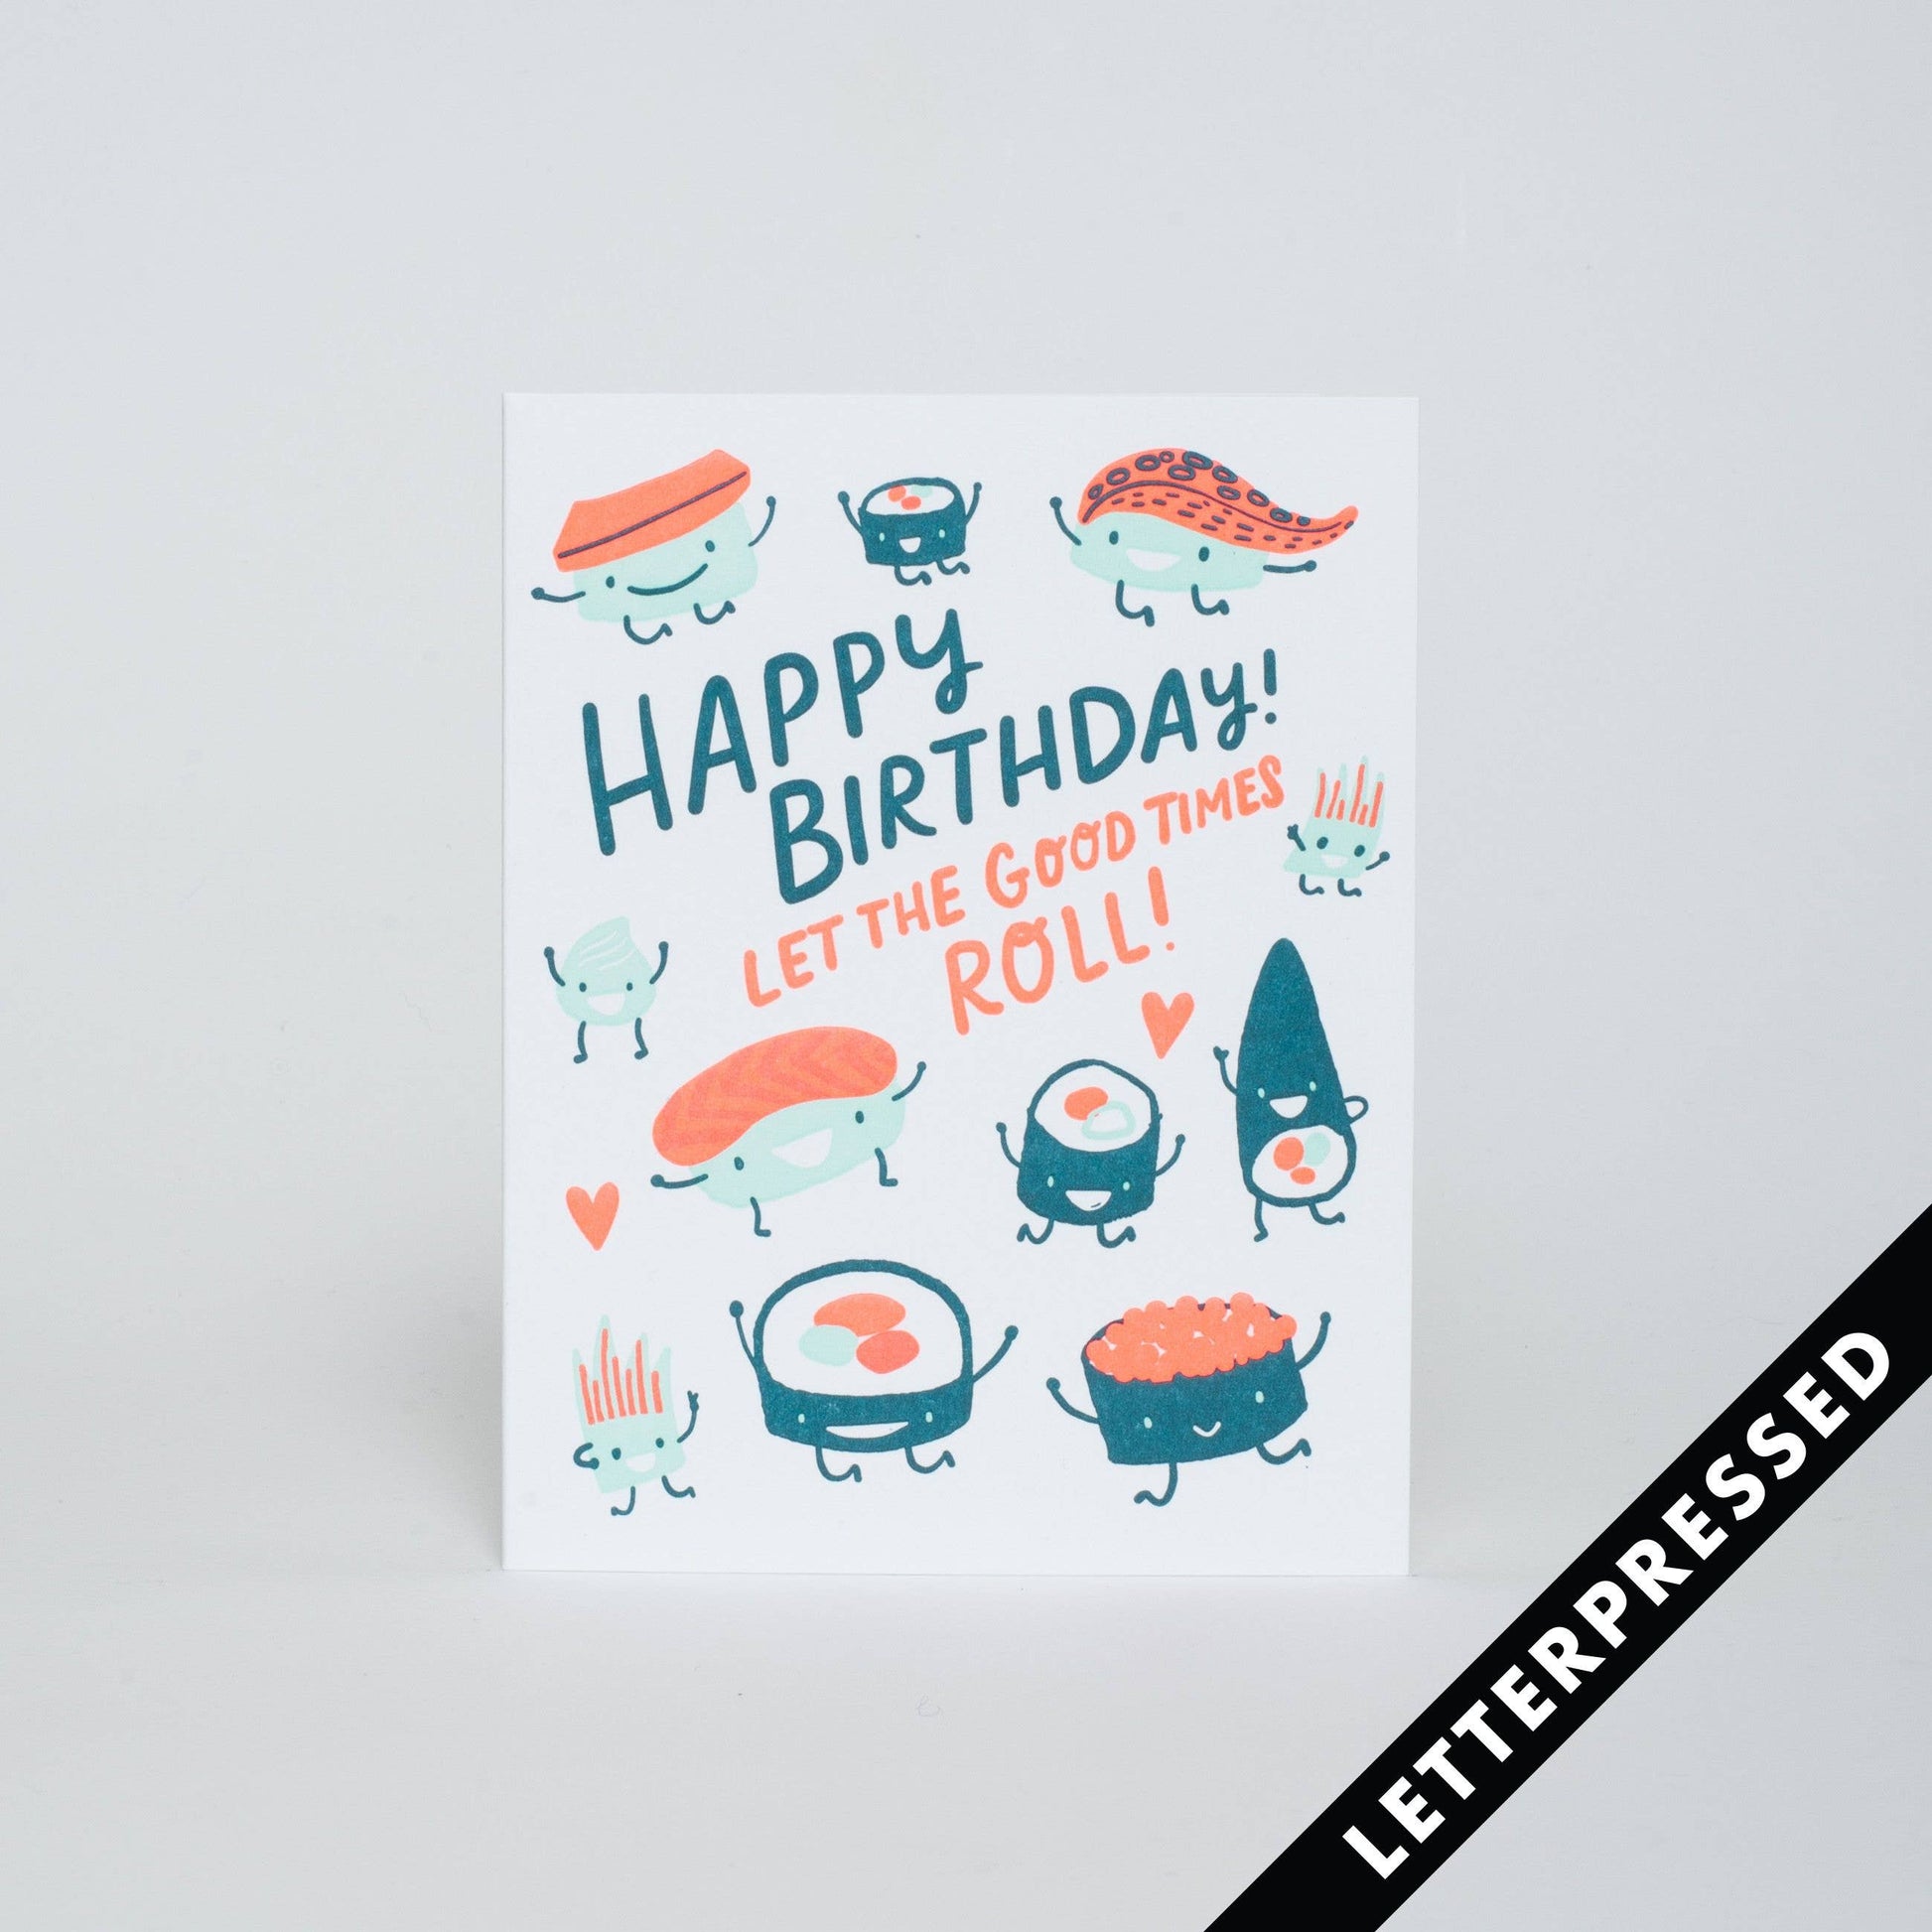 Greeting card that reads "Happy Birthday! Let the good times roll!" and has various sushis on it